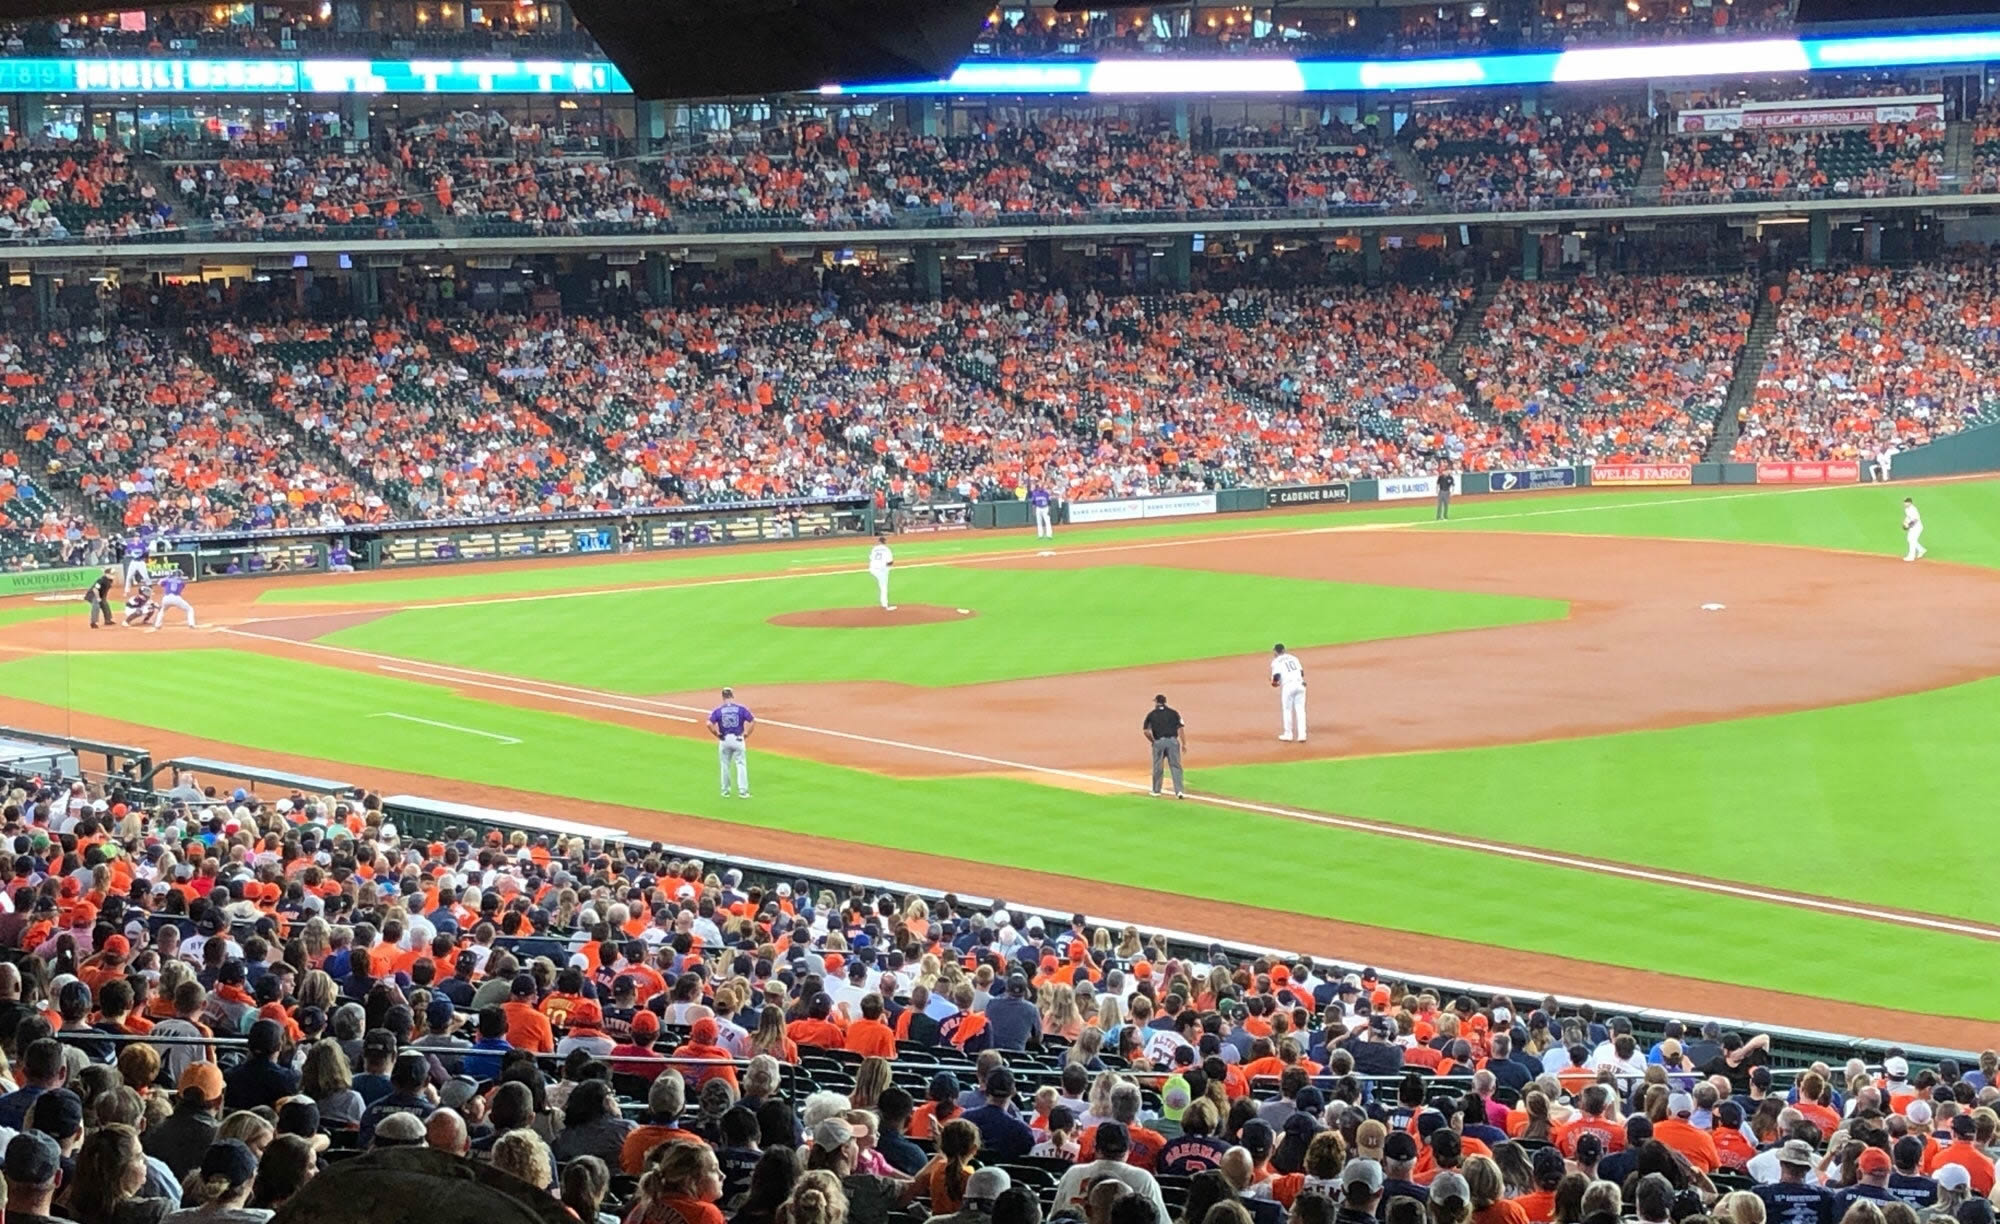 section 129, row 39 seat view  for baseball - minute maid park